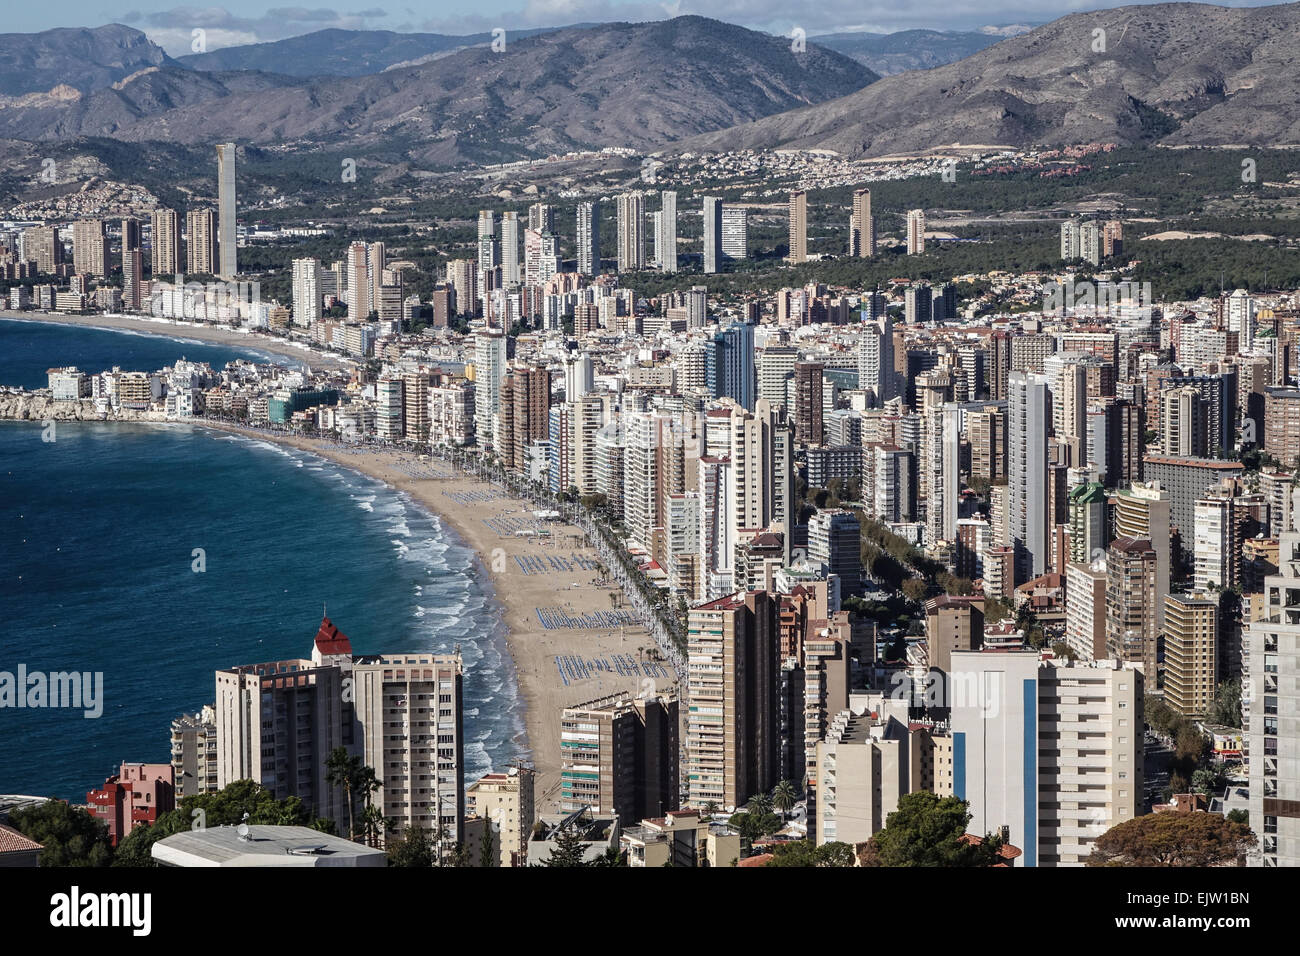 Benidorm Aerial View From The Cross Overlooking The Town Playa